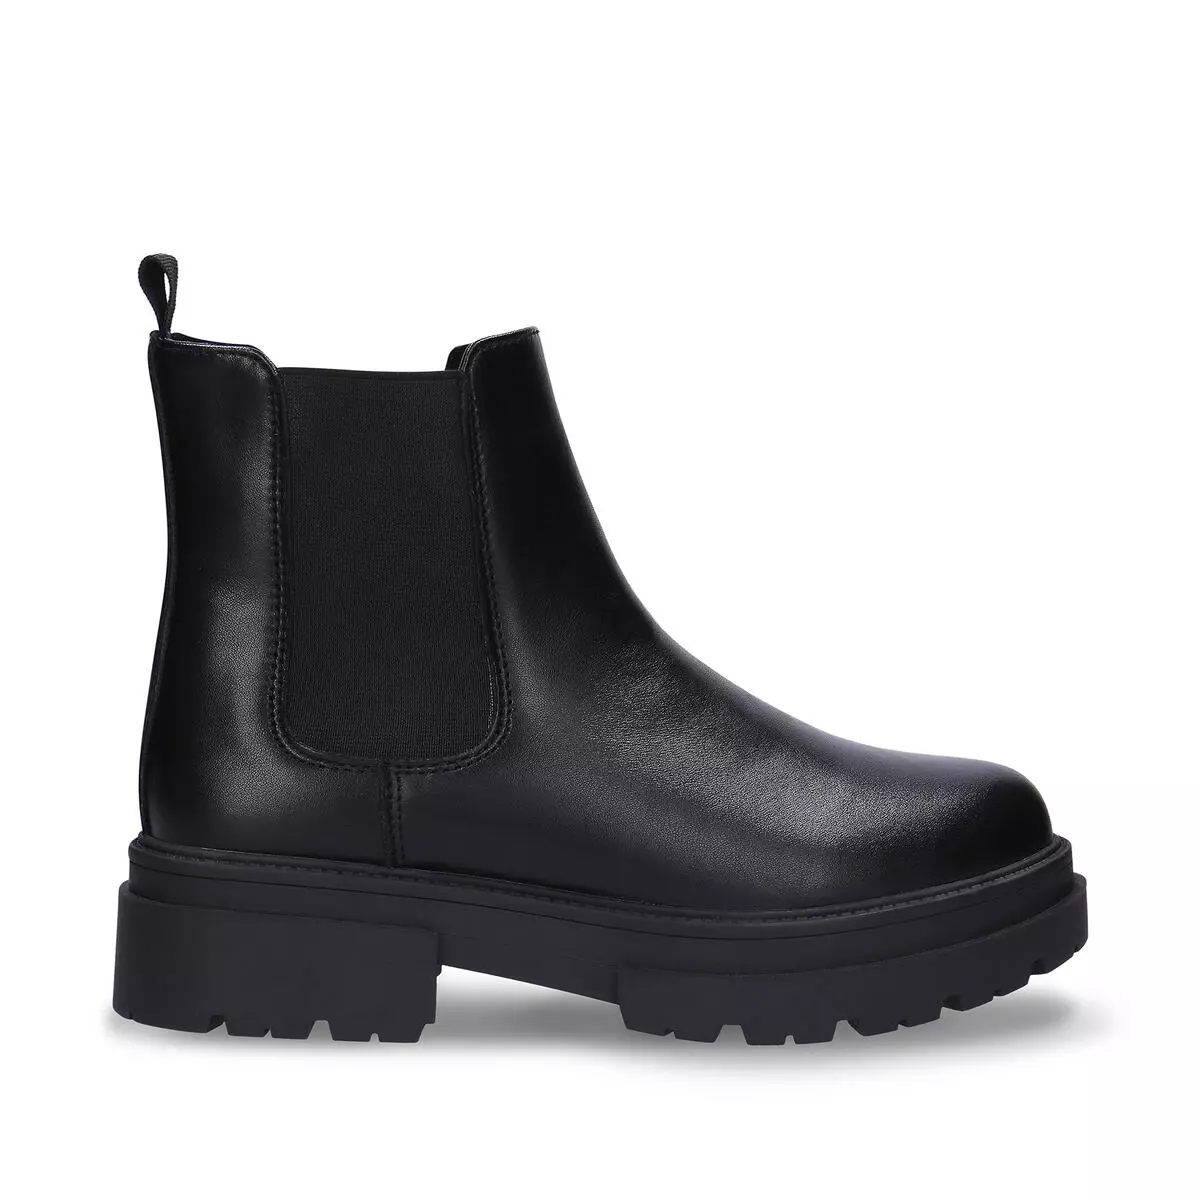 Chelsea-Boots Modell: Rebe